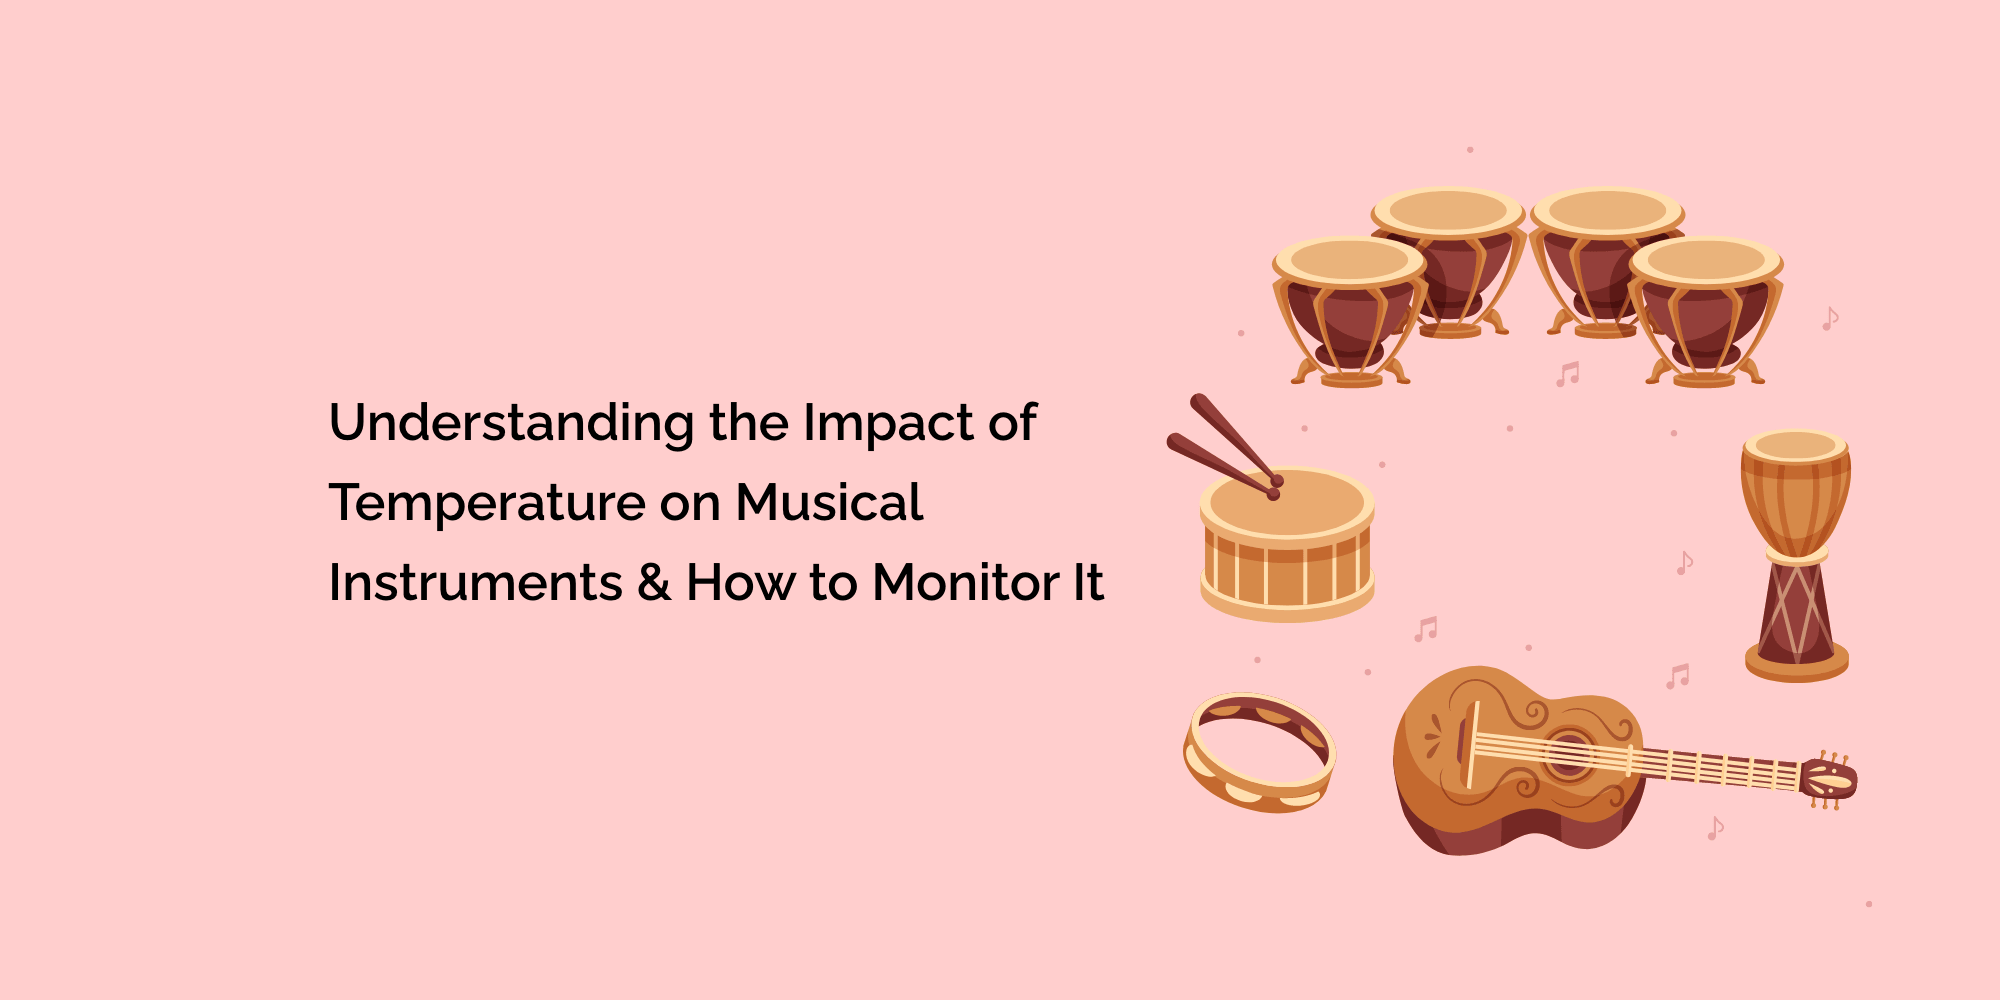 Understanding the Impact of Temperature on Musical Instruments and How to Monitor It